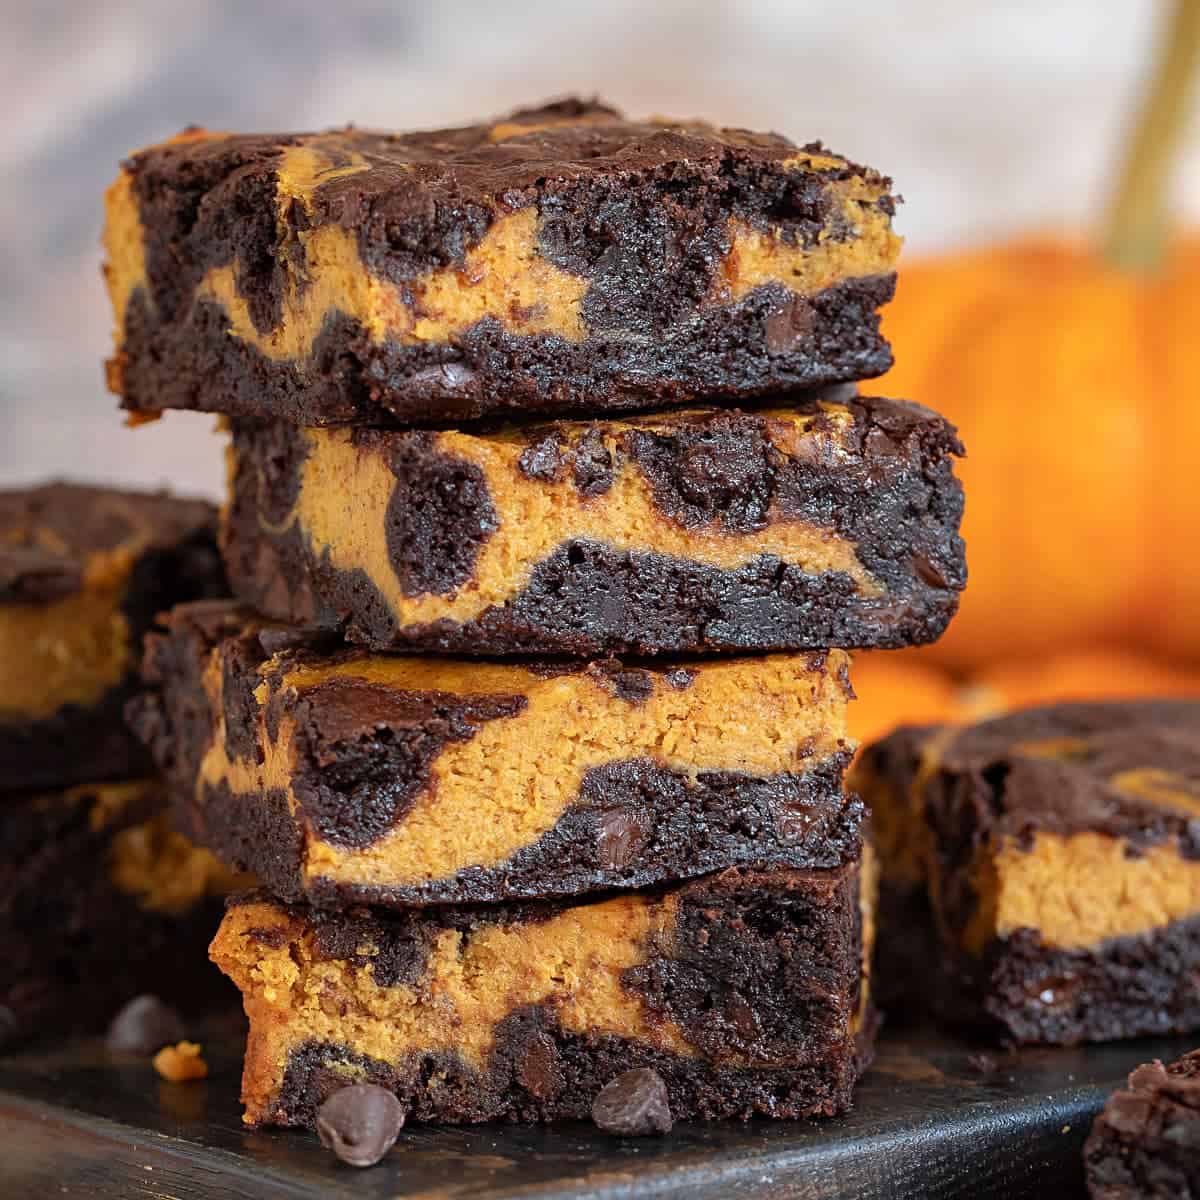 A close up view of a stack of chocolate pumpkin brownies and chocolate chips.